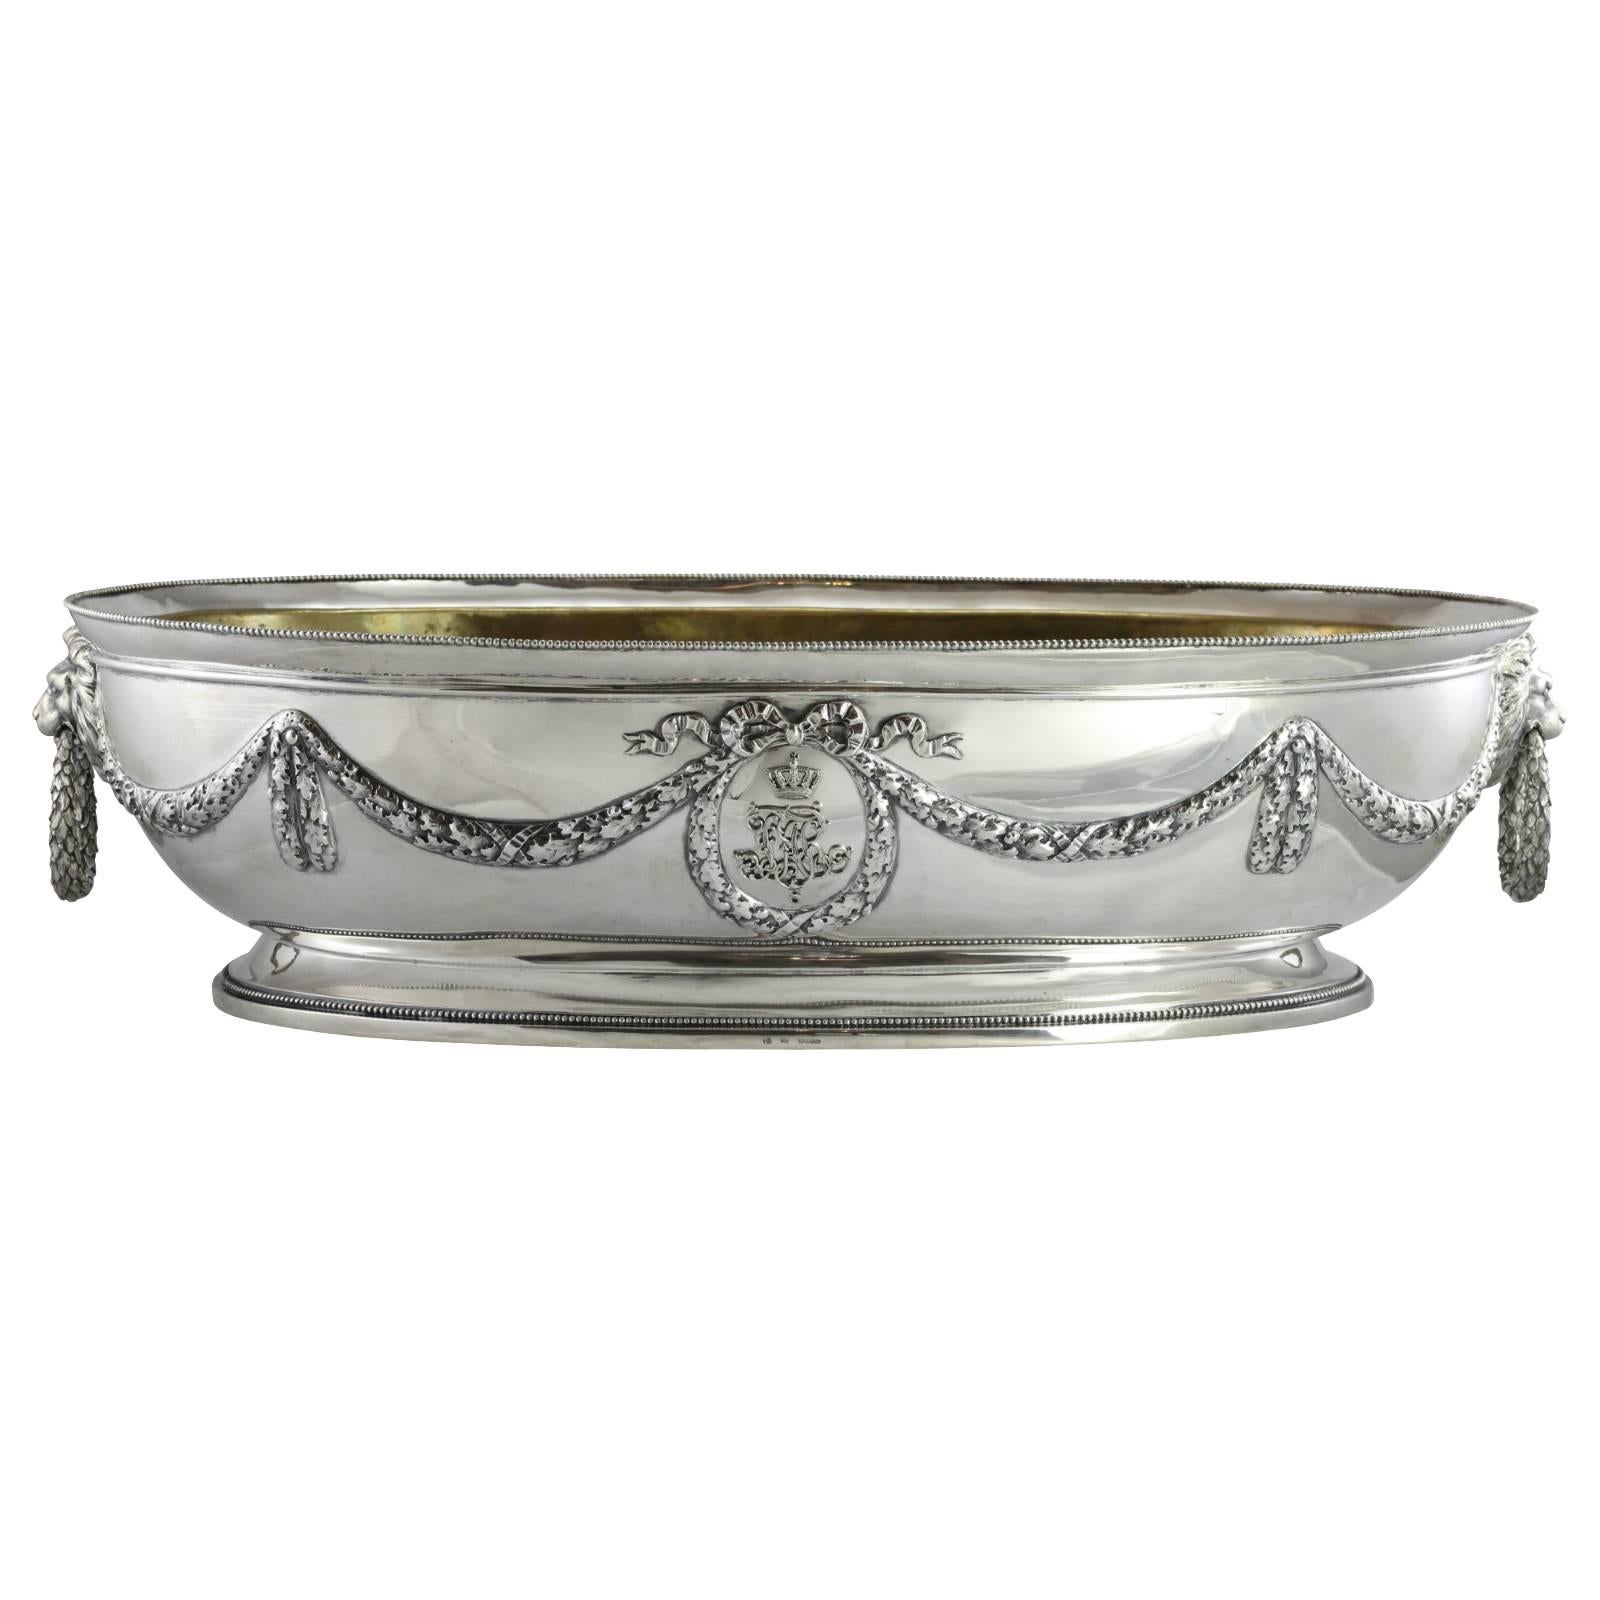 Early 20th Century German Continental Silver Presentation Wine Cooler For Sale